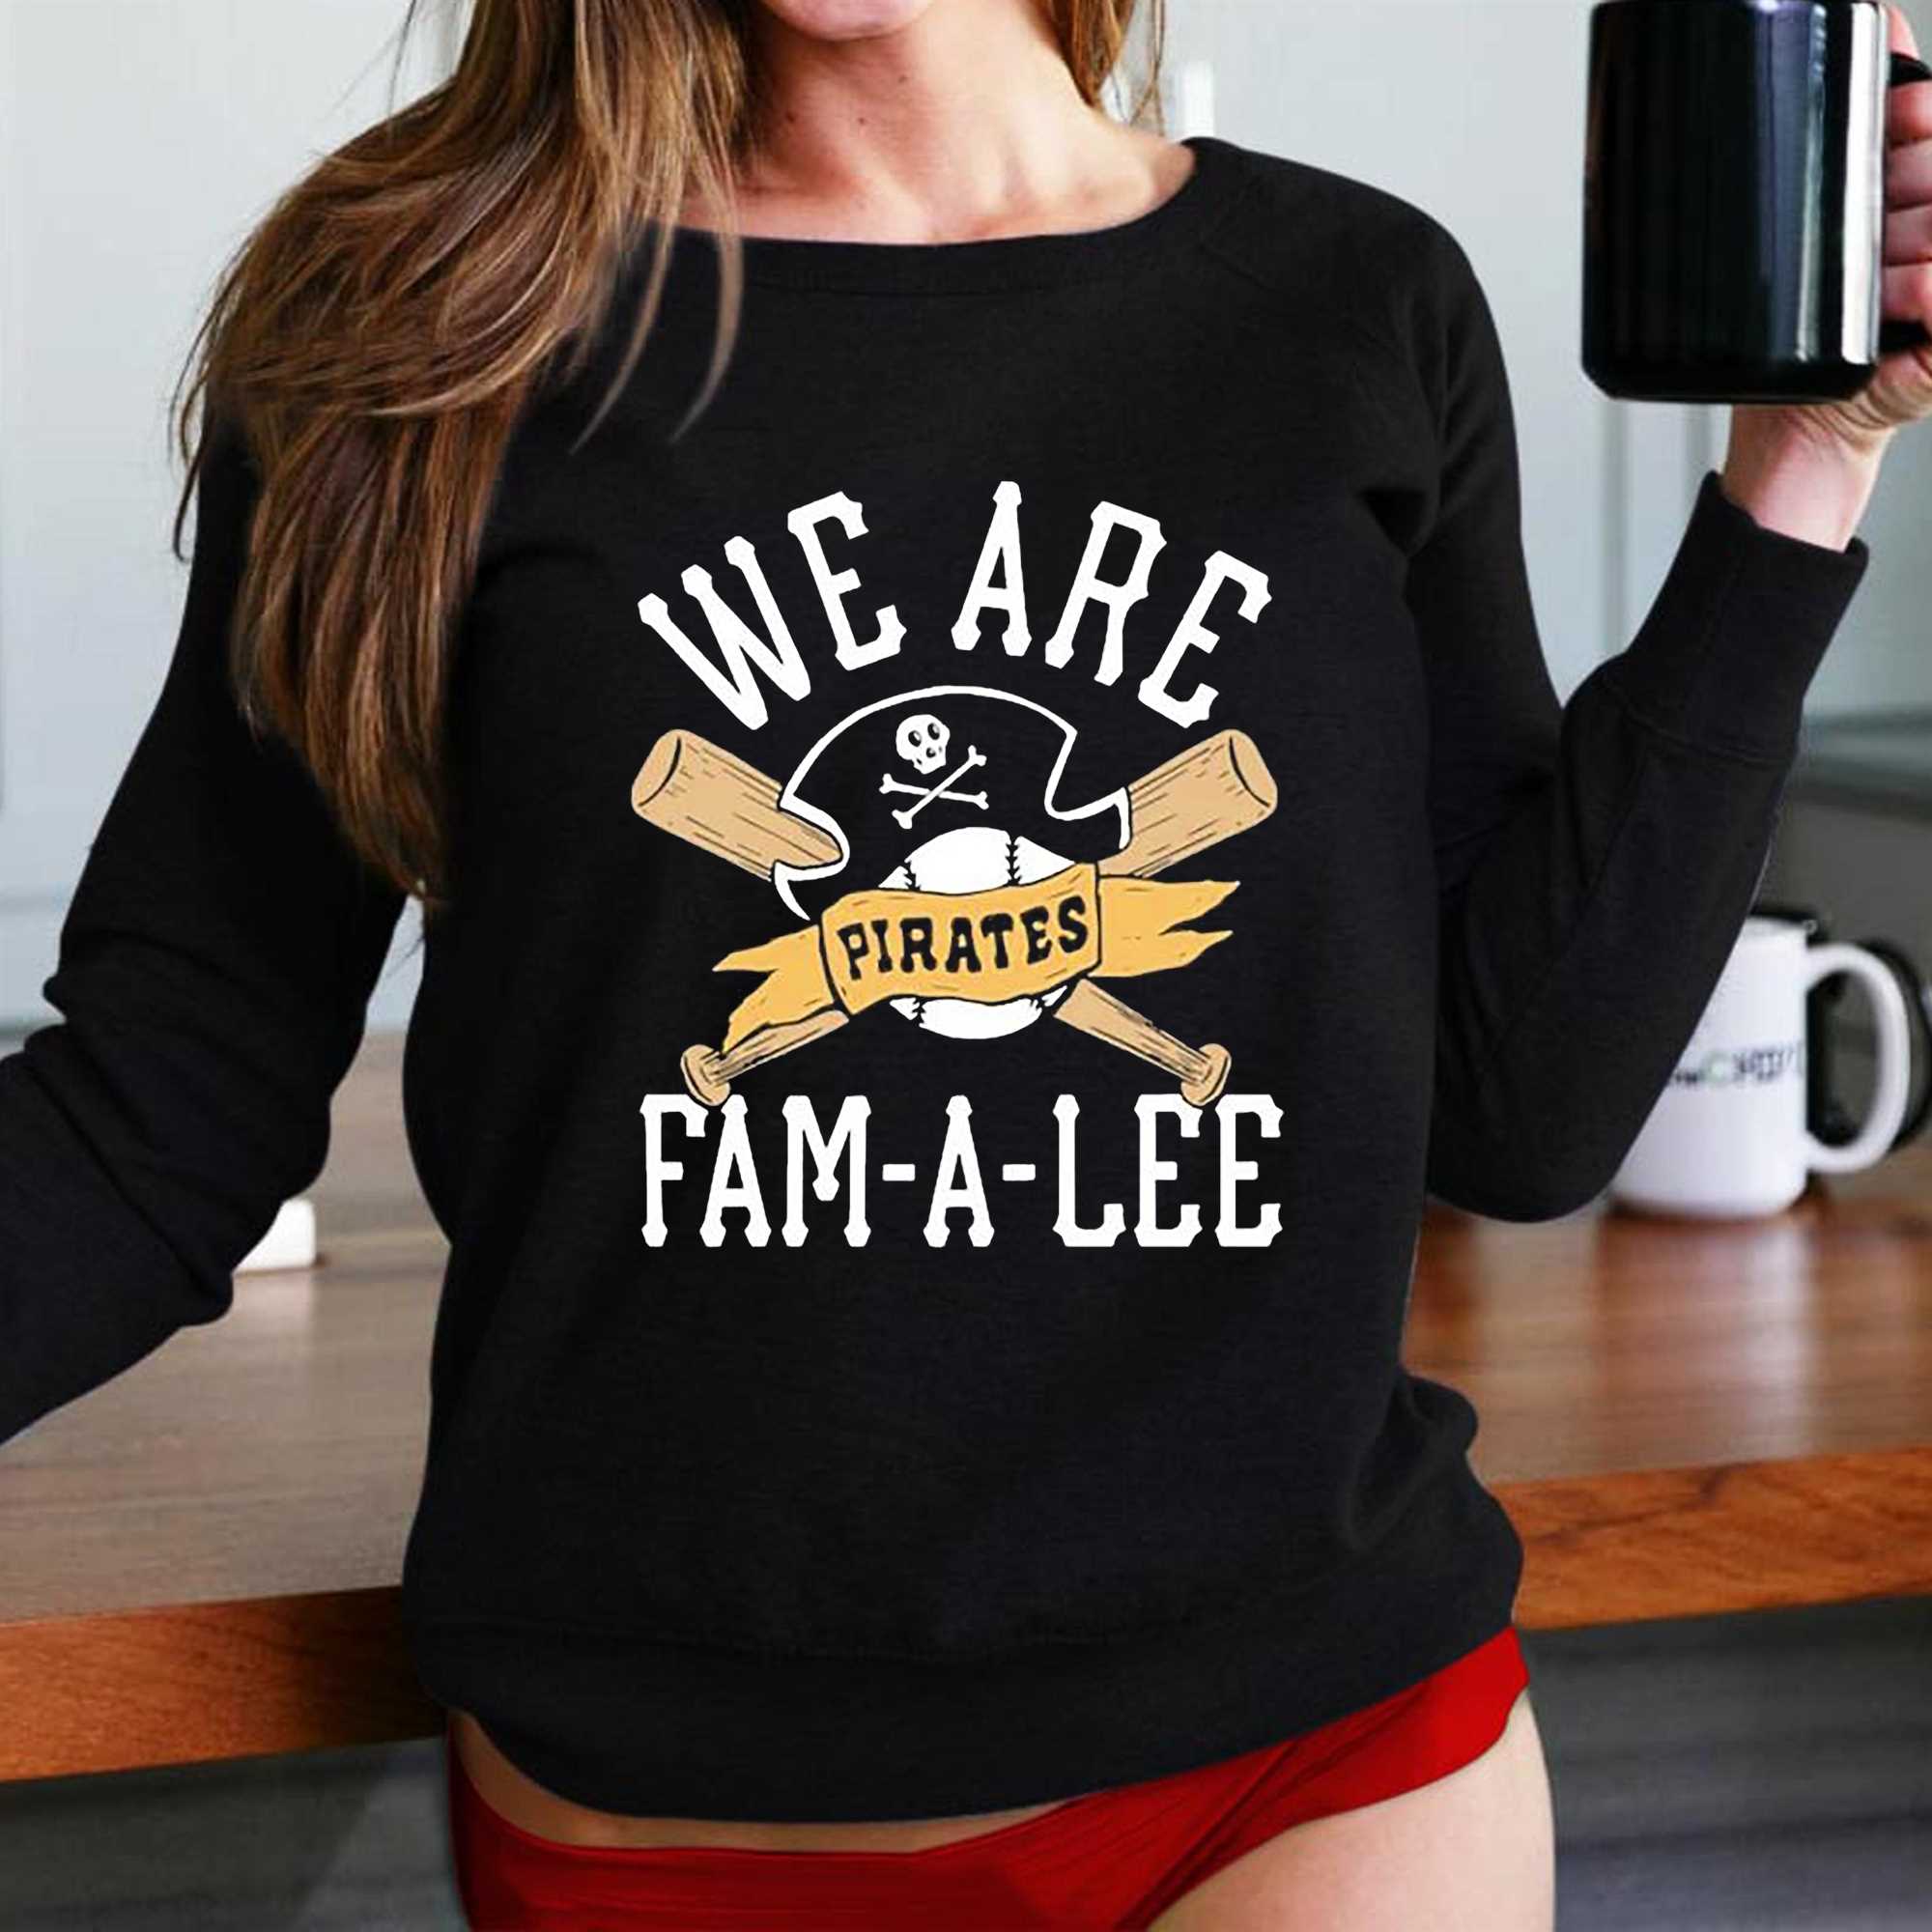 pittsburgh pirates we are family t shirt